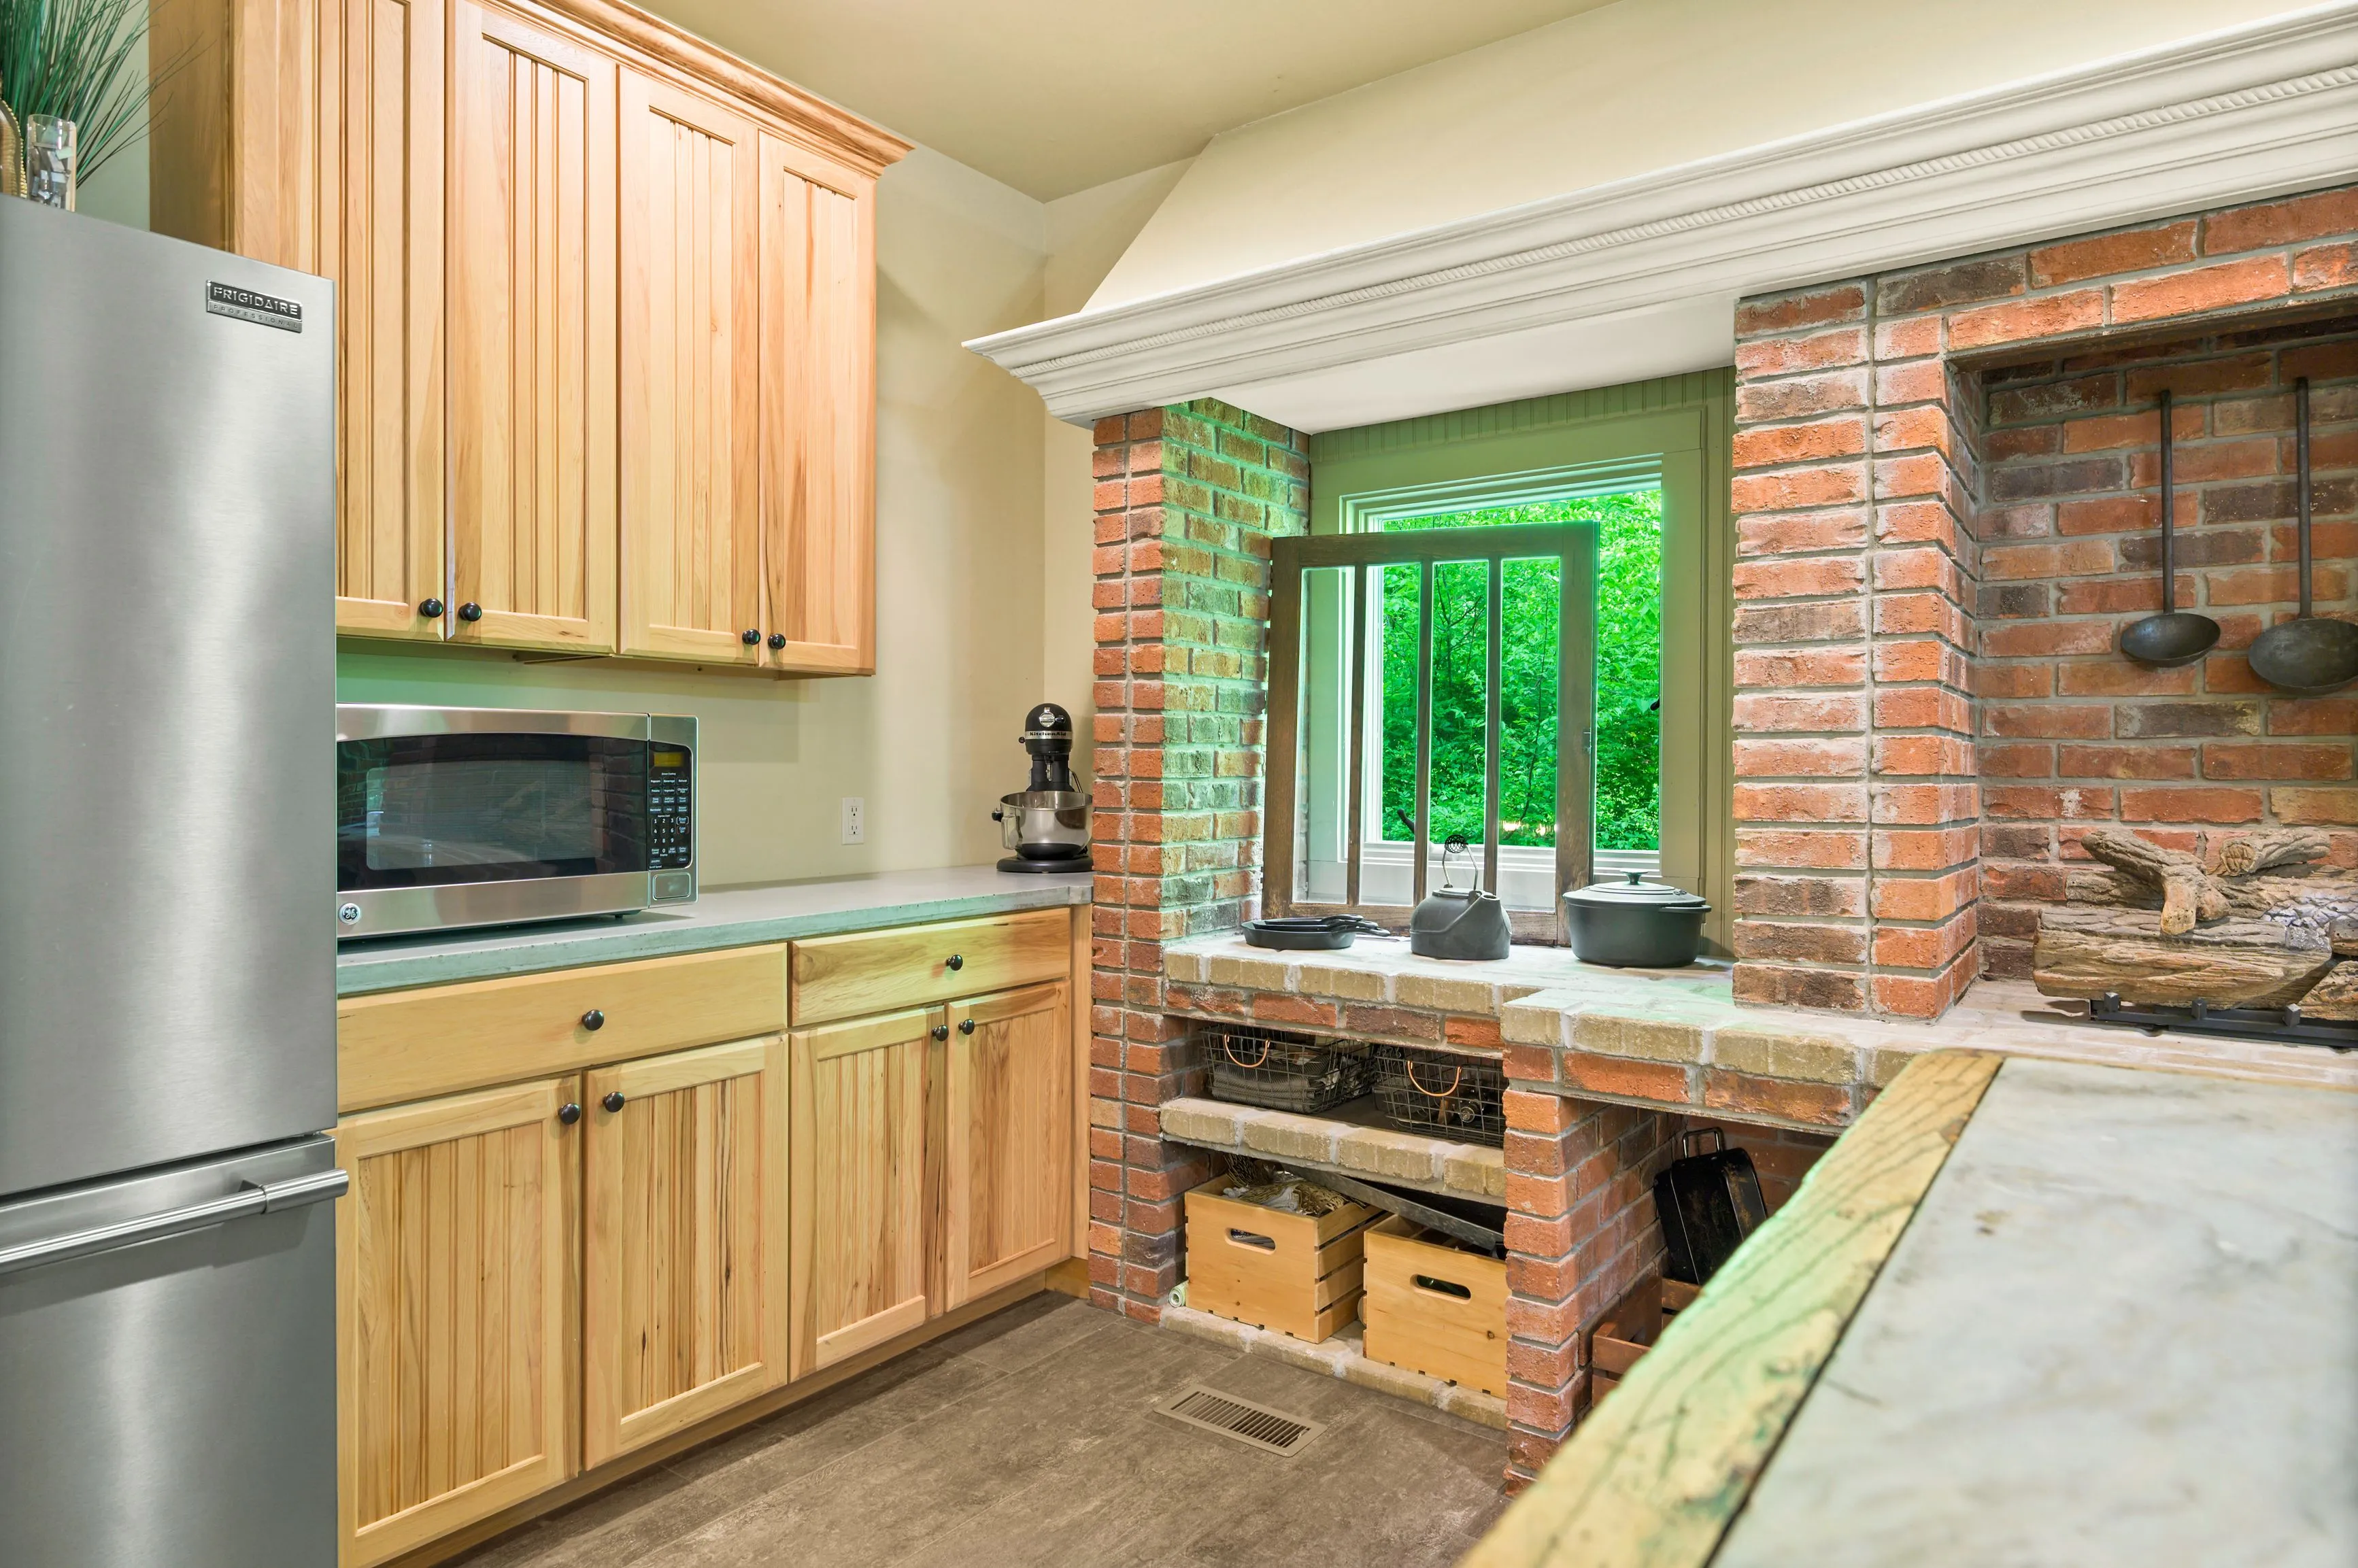 Modern kitchen interior with wooden cabinets and brick fireplace, stainless steel refrigerator and microwave, overlooking greenery through the window.